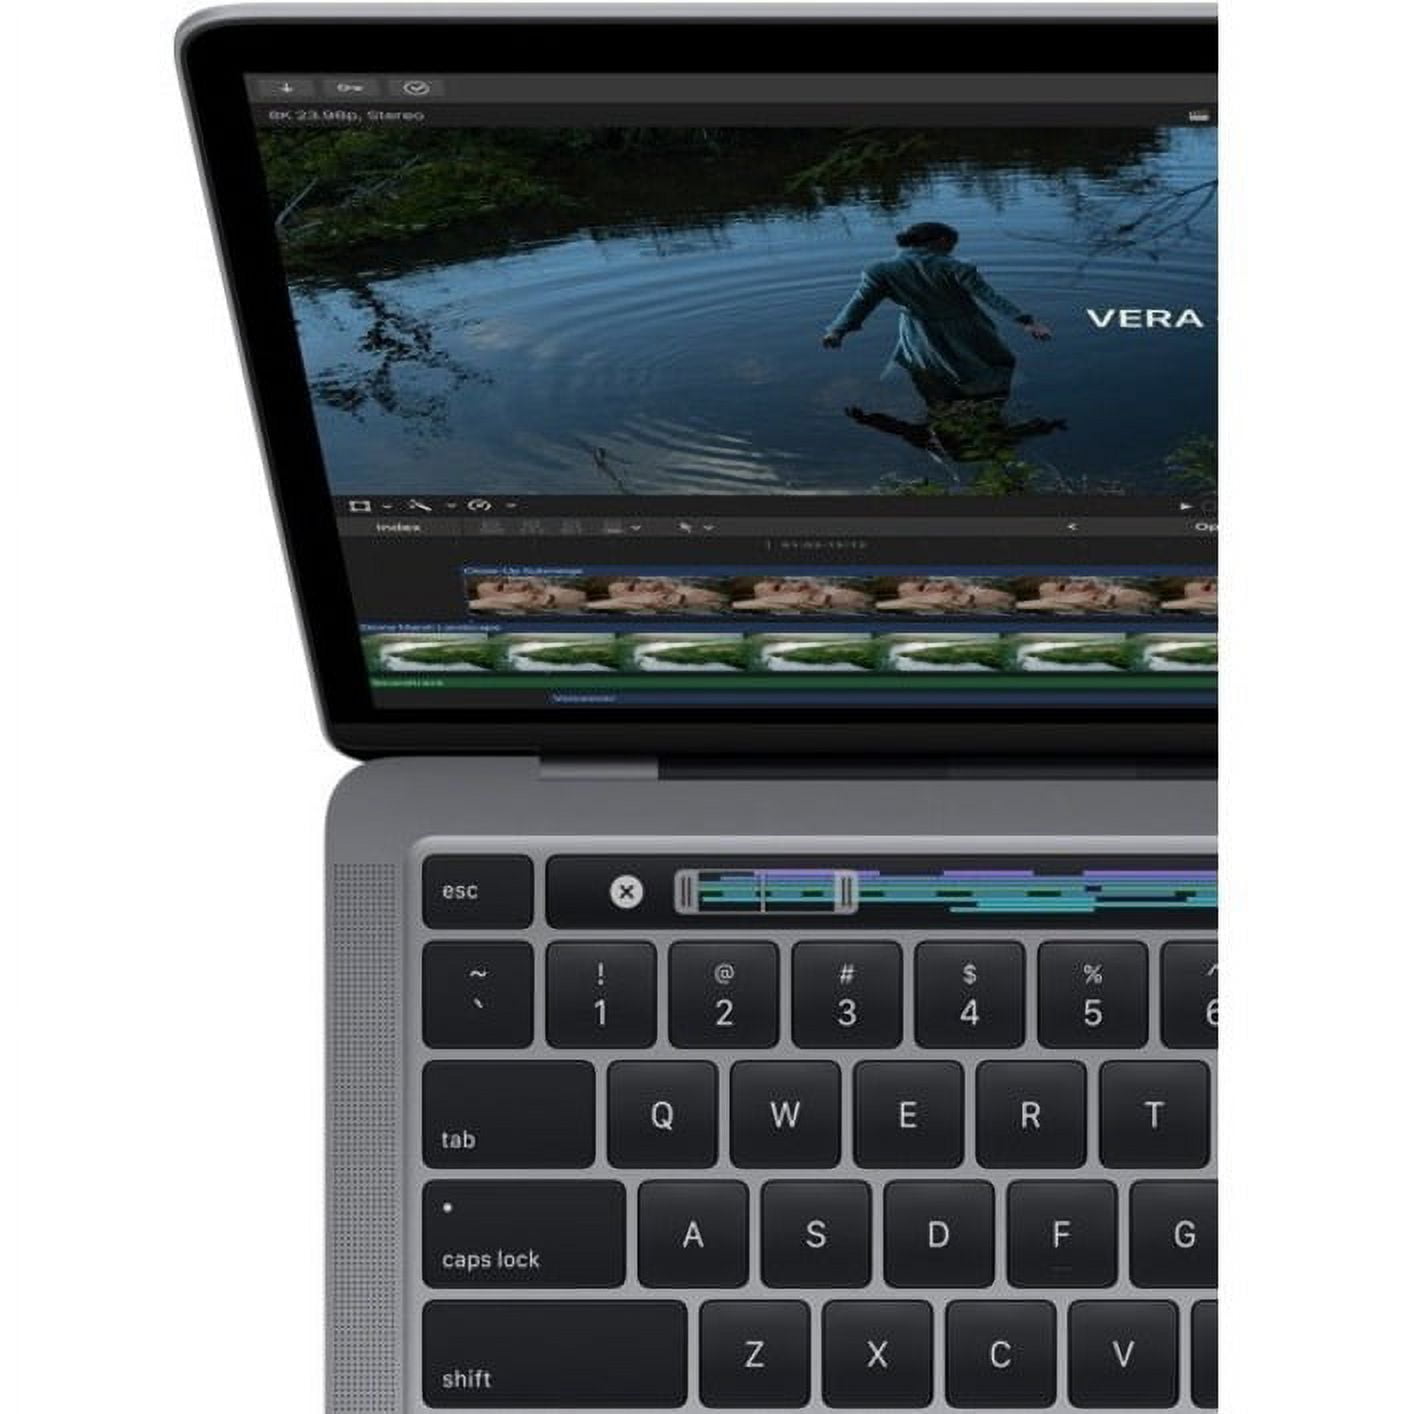  Apple 2022 MacBook Pro Laptop with M2 chip: 13-inch Retina  Display, 8GB RAM, 256GB ​​​​​​​SSD ​​​​​​​Storage, Touch Bar, Backlit  Keyboard, FaceTime HD Camera. Works with iPhone and iPad; Space Gray 